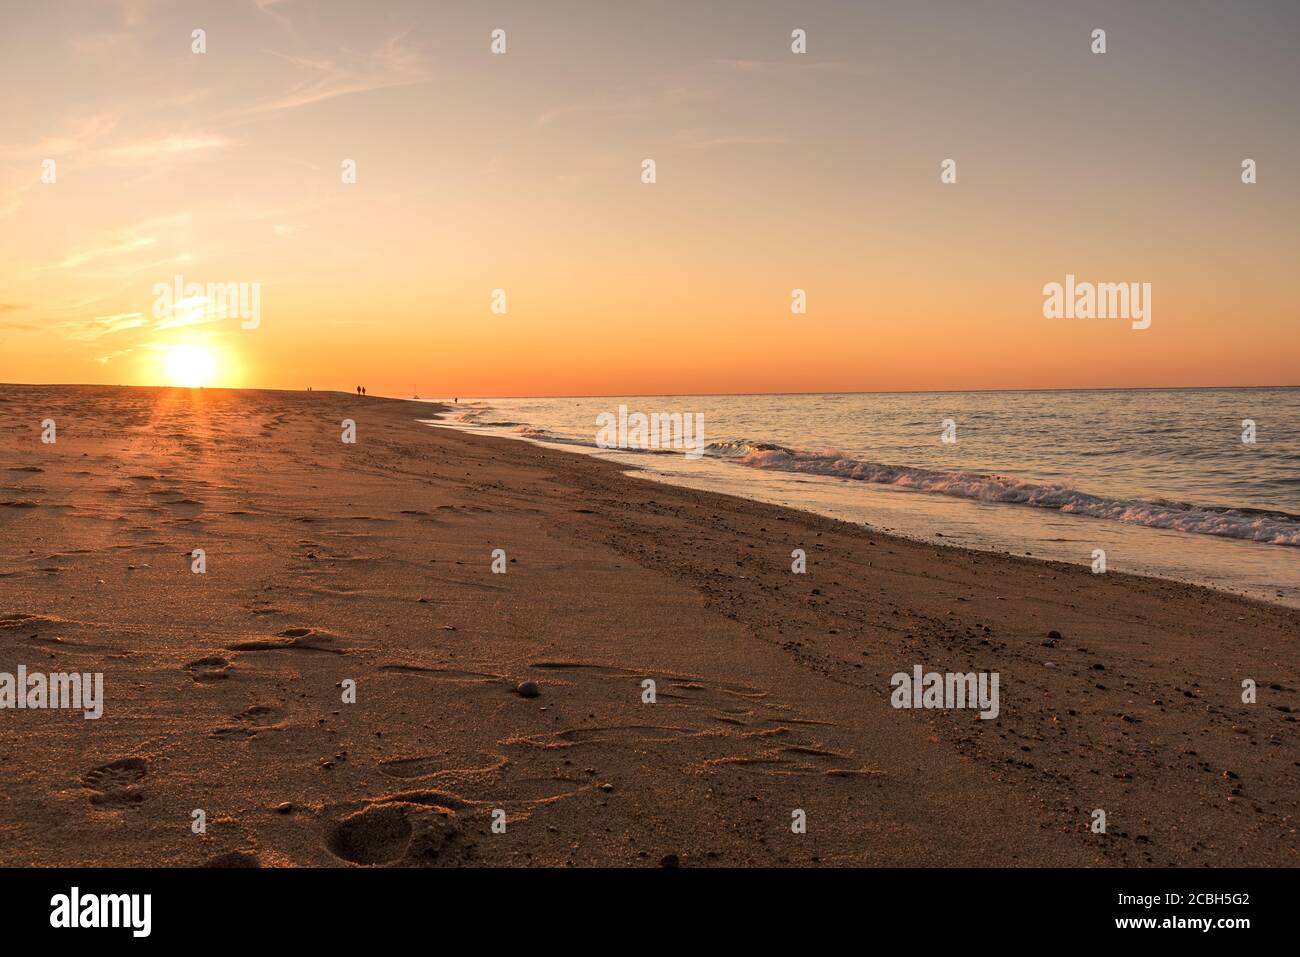 Setting sun over a beautiful sandy beach. People strolling along the beach are visible in distance Stock Photo